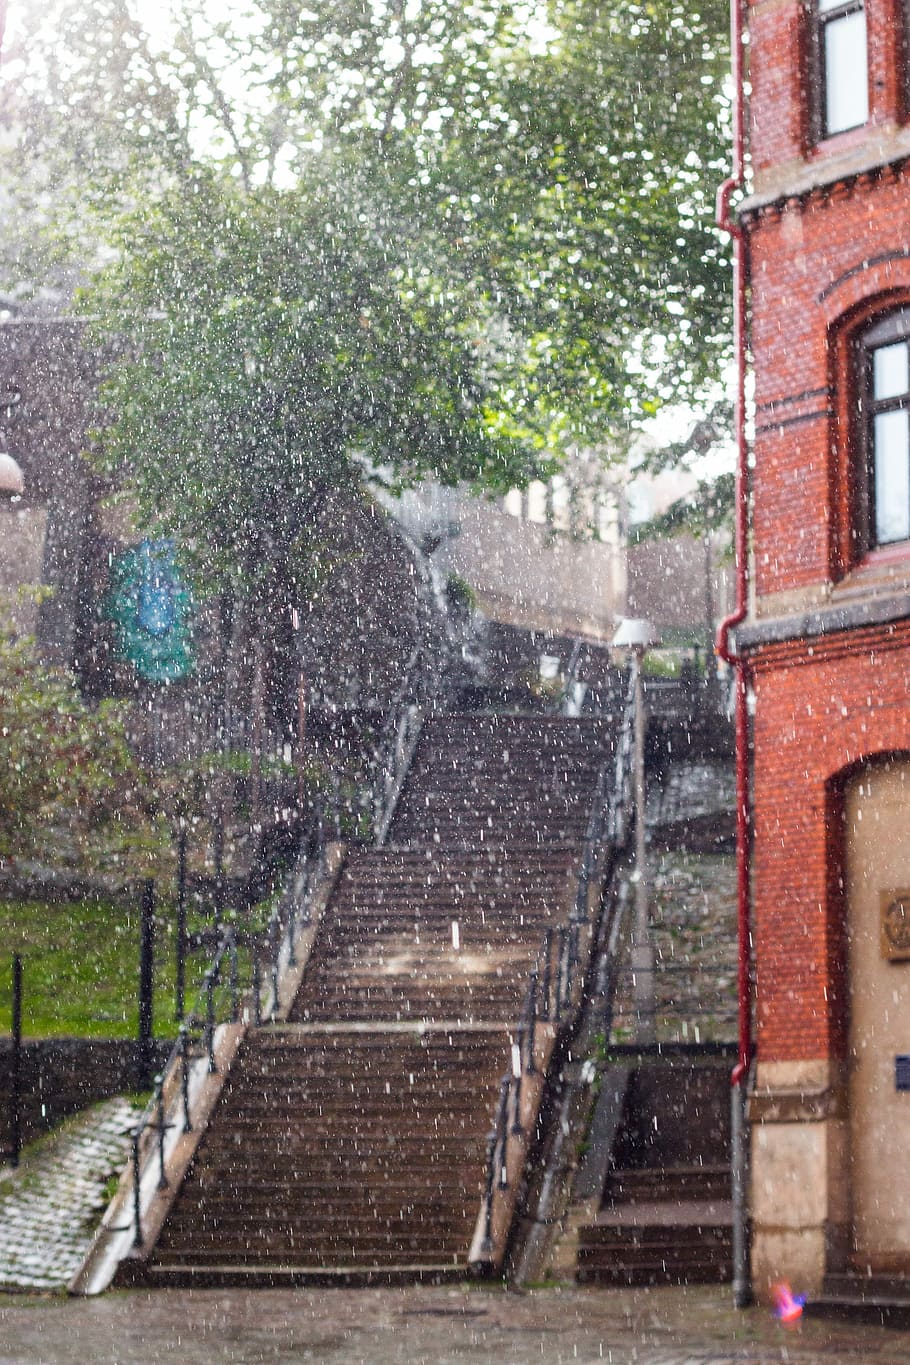 rainfall on building and stairs, brown concrete stairs under tall green tree near red bricked building at rainy day